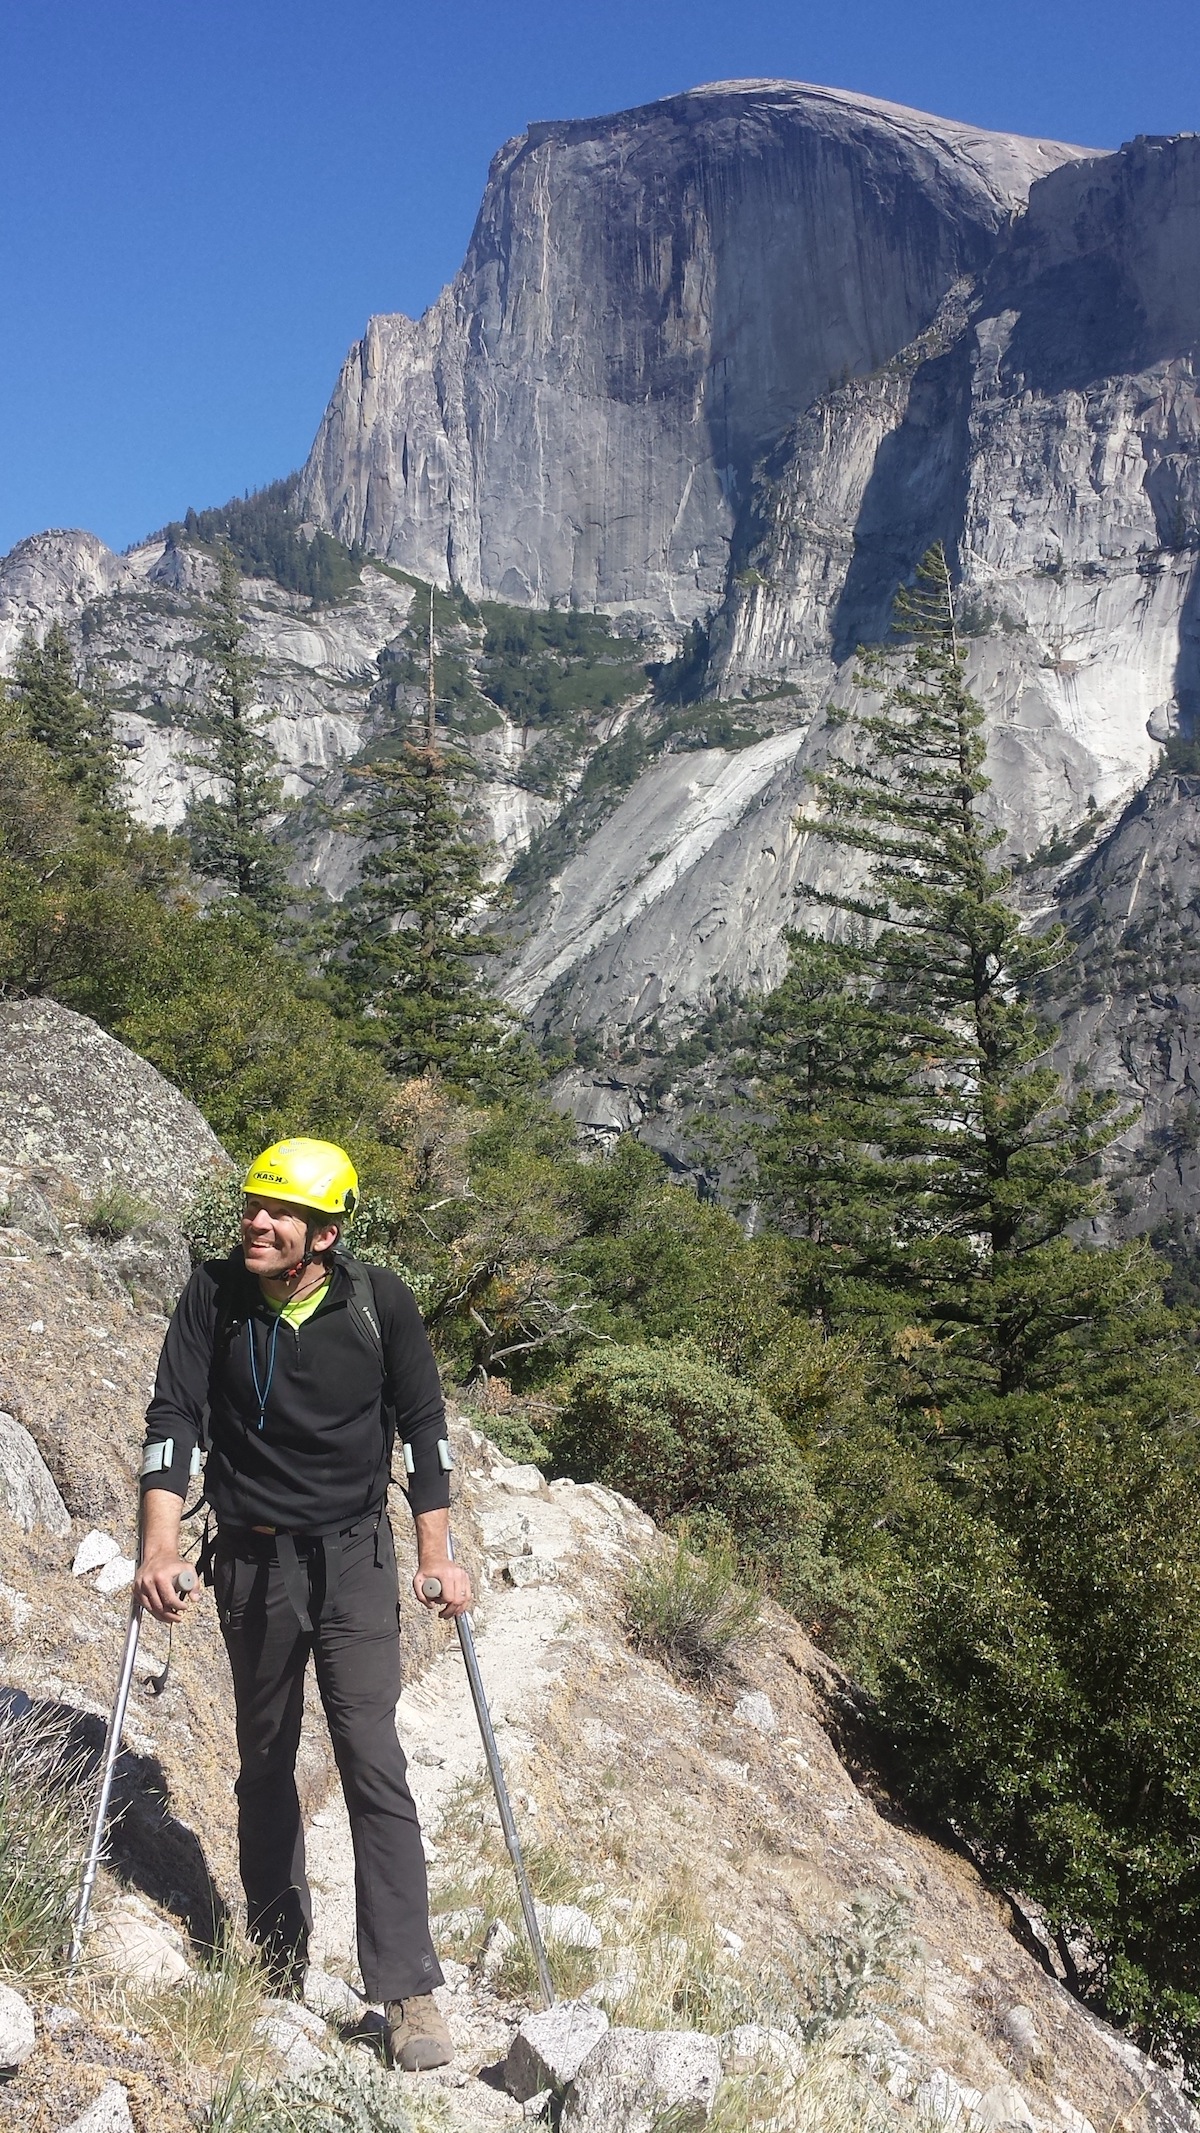 The author on the approach to Washington Column with Half Dome in the background, 2015. [Photo] Alex McKiernan collection